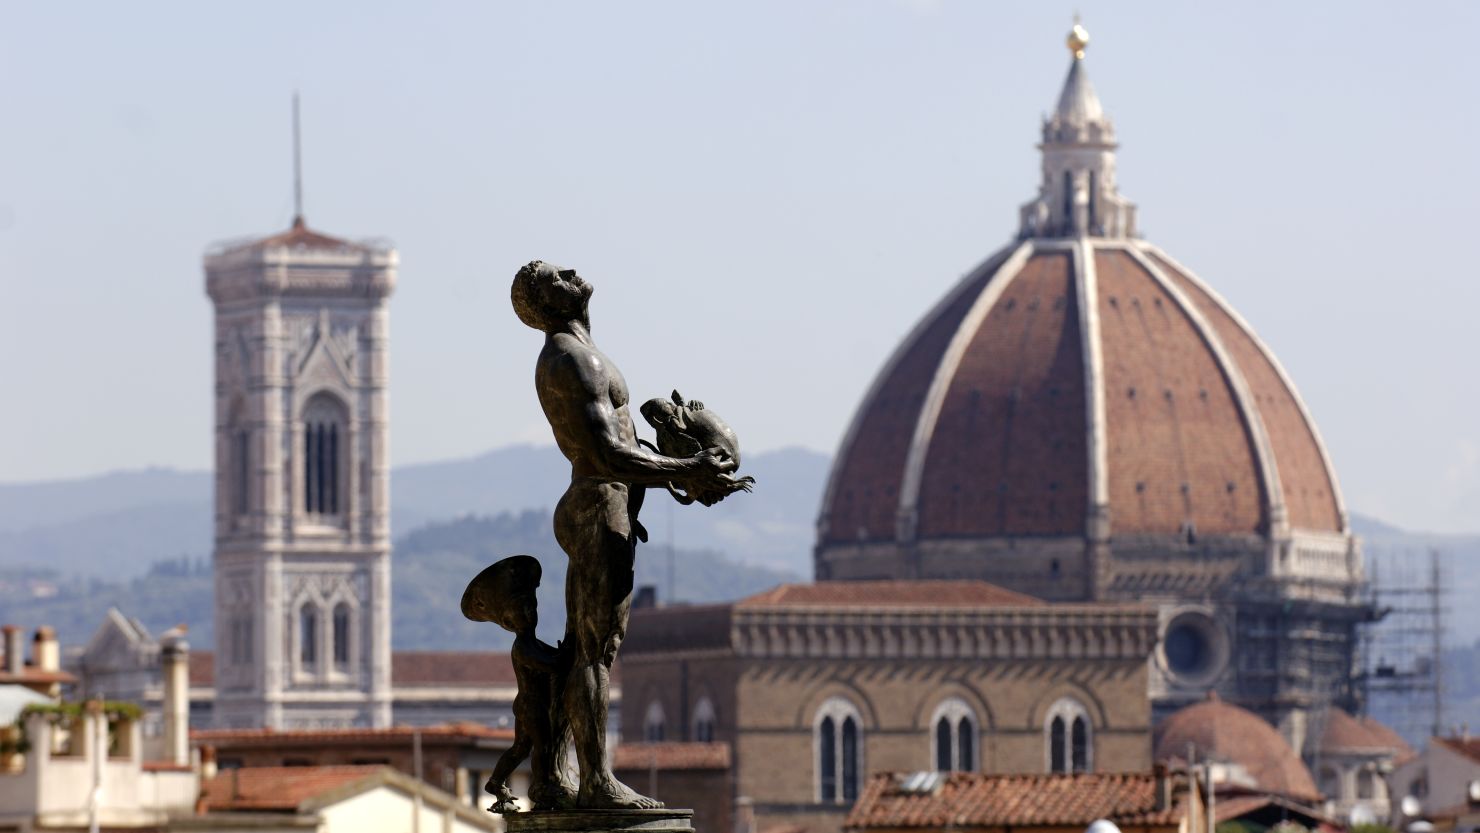 Giardino di Boboli in Florence is a short walk from the Uffiz and is a perfect lovers' escape.